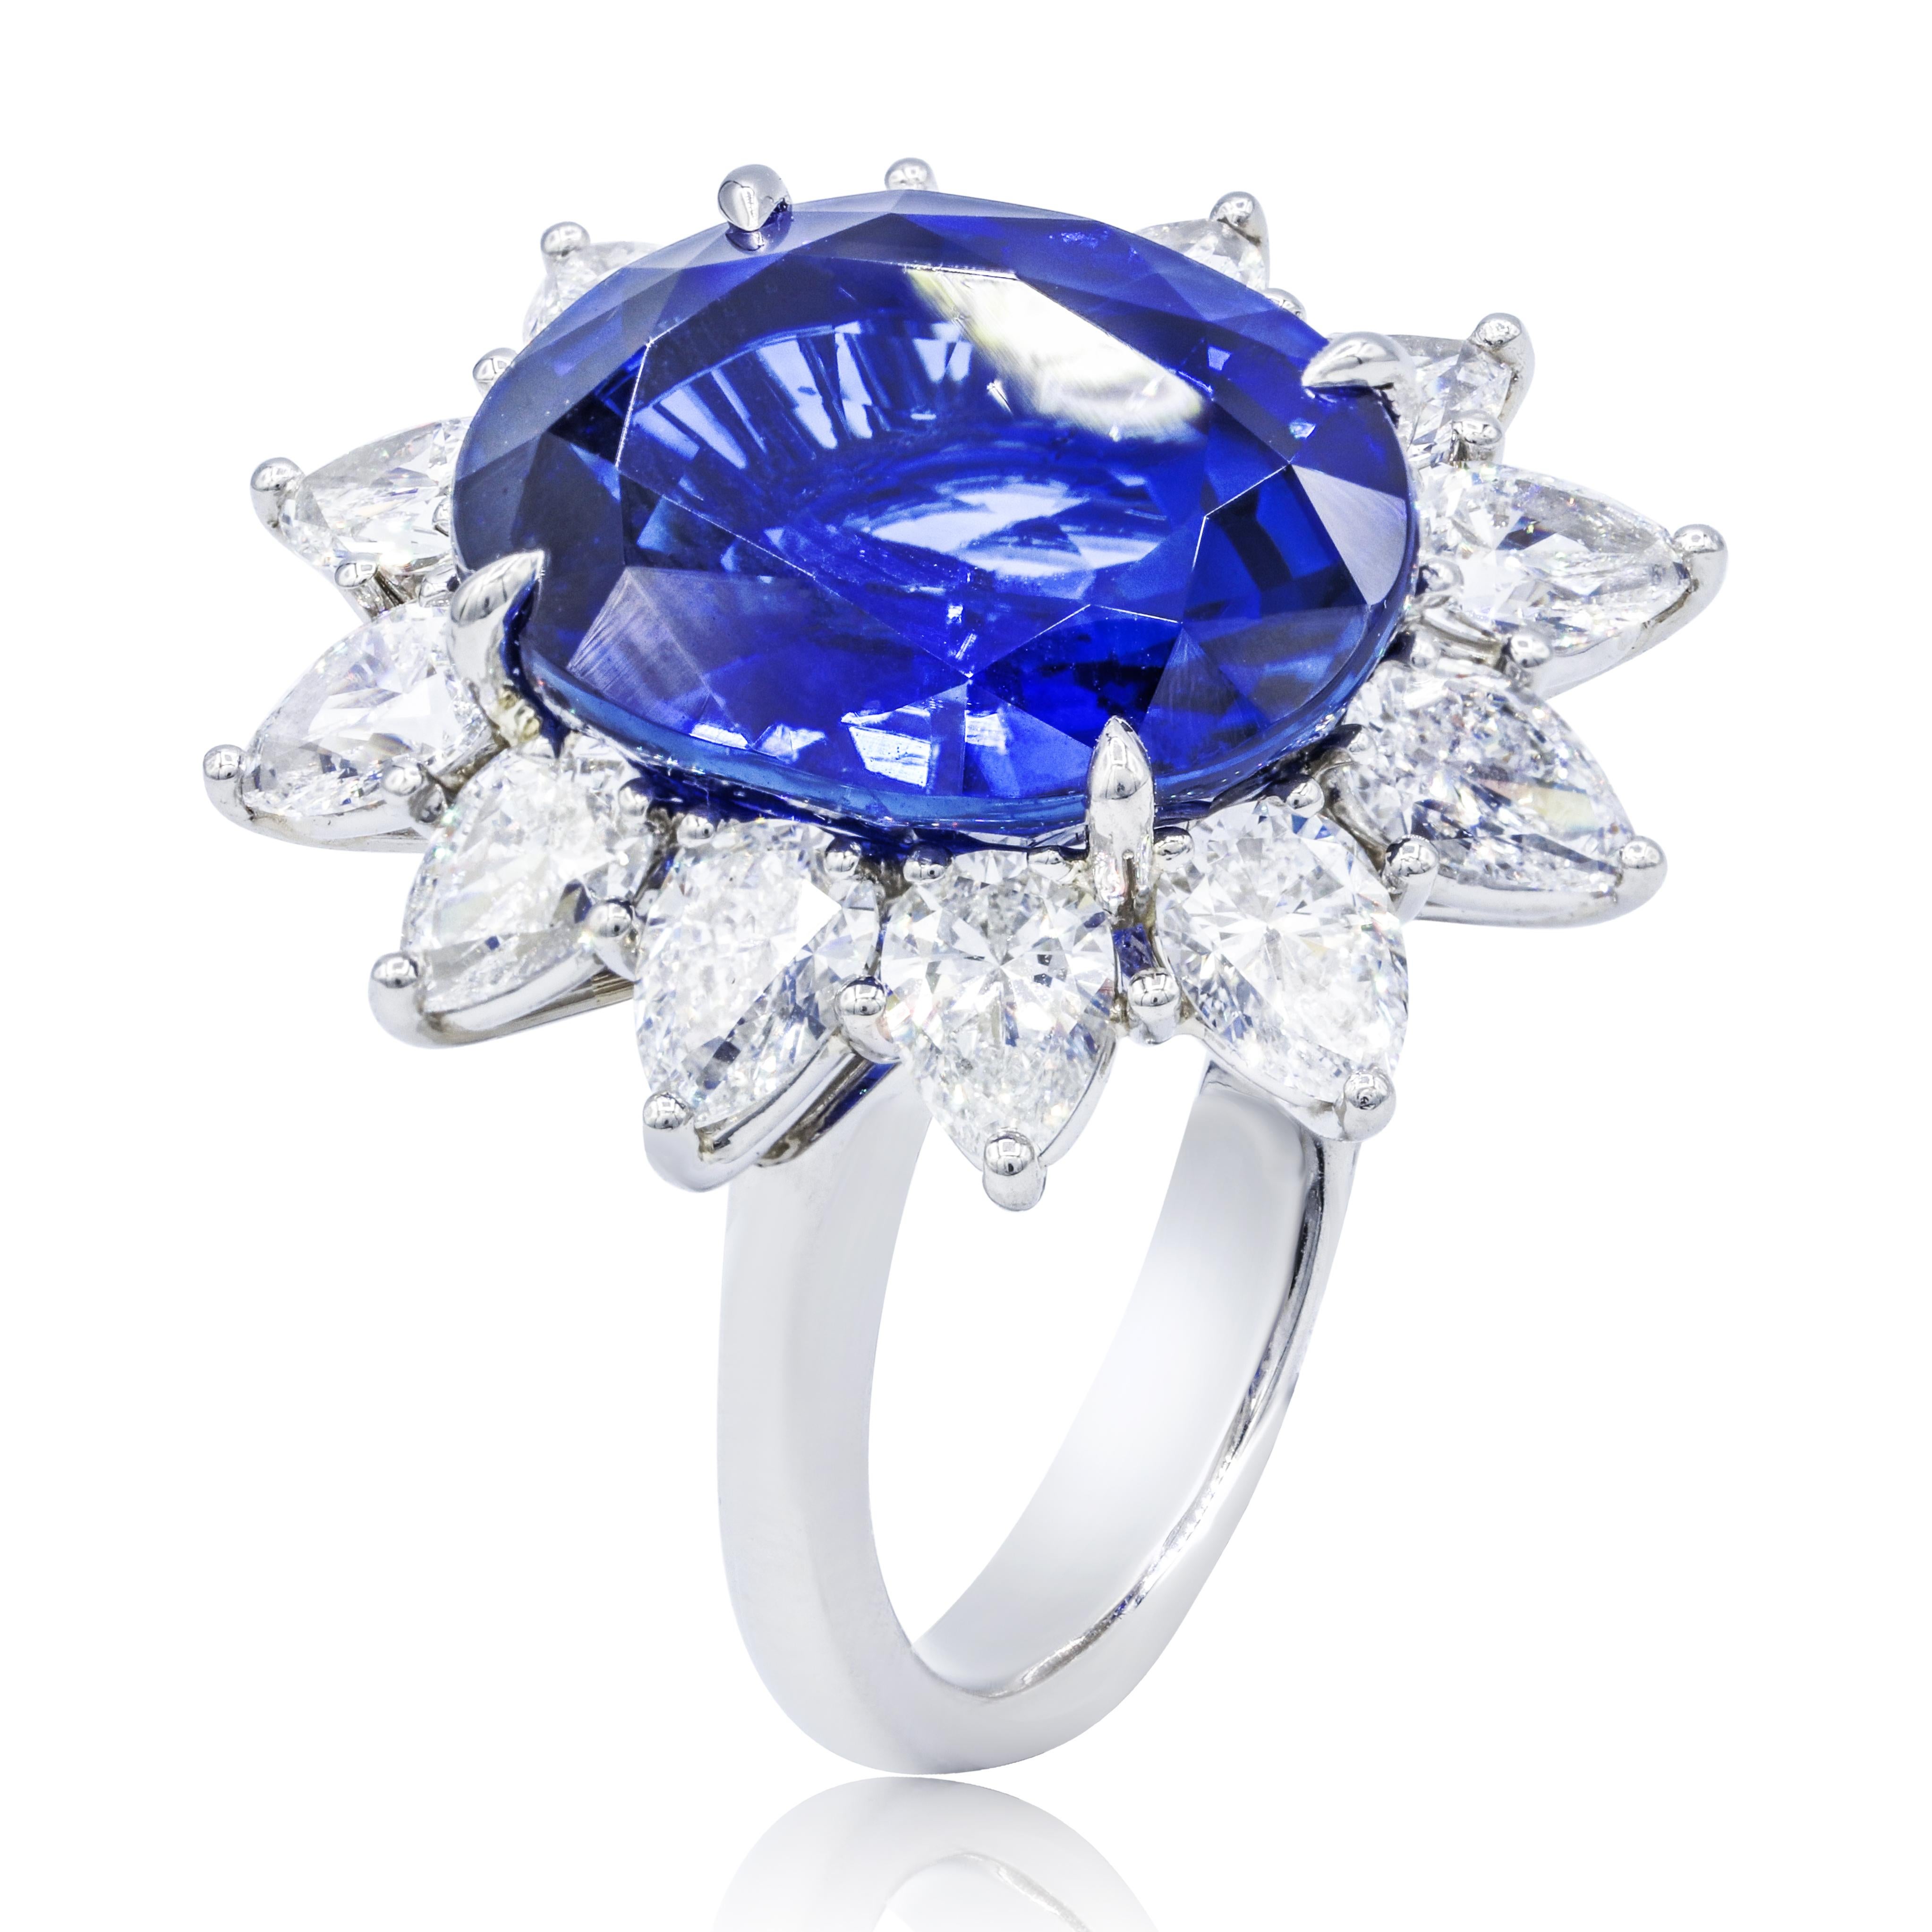 Royal platinum sapphire and diamond ring with C.Dunaigre certified 16.20 carats oval cut ceylon sapphire set with 3.92 carats in a halo with pear shaped diamonds.